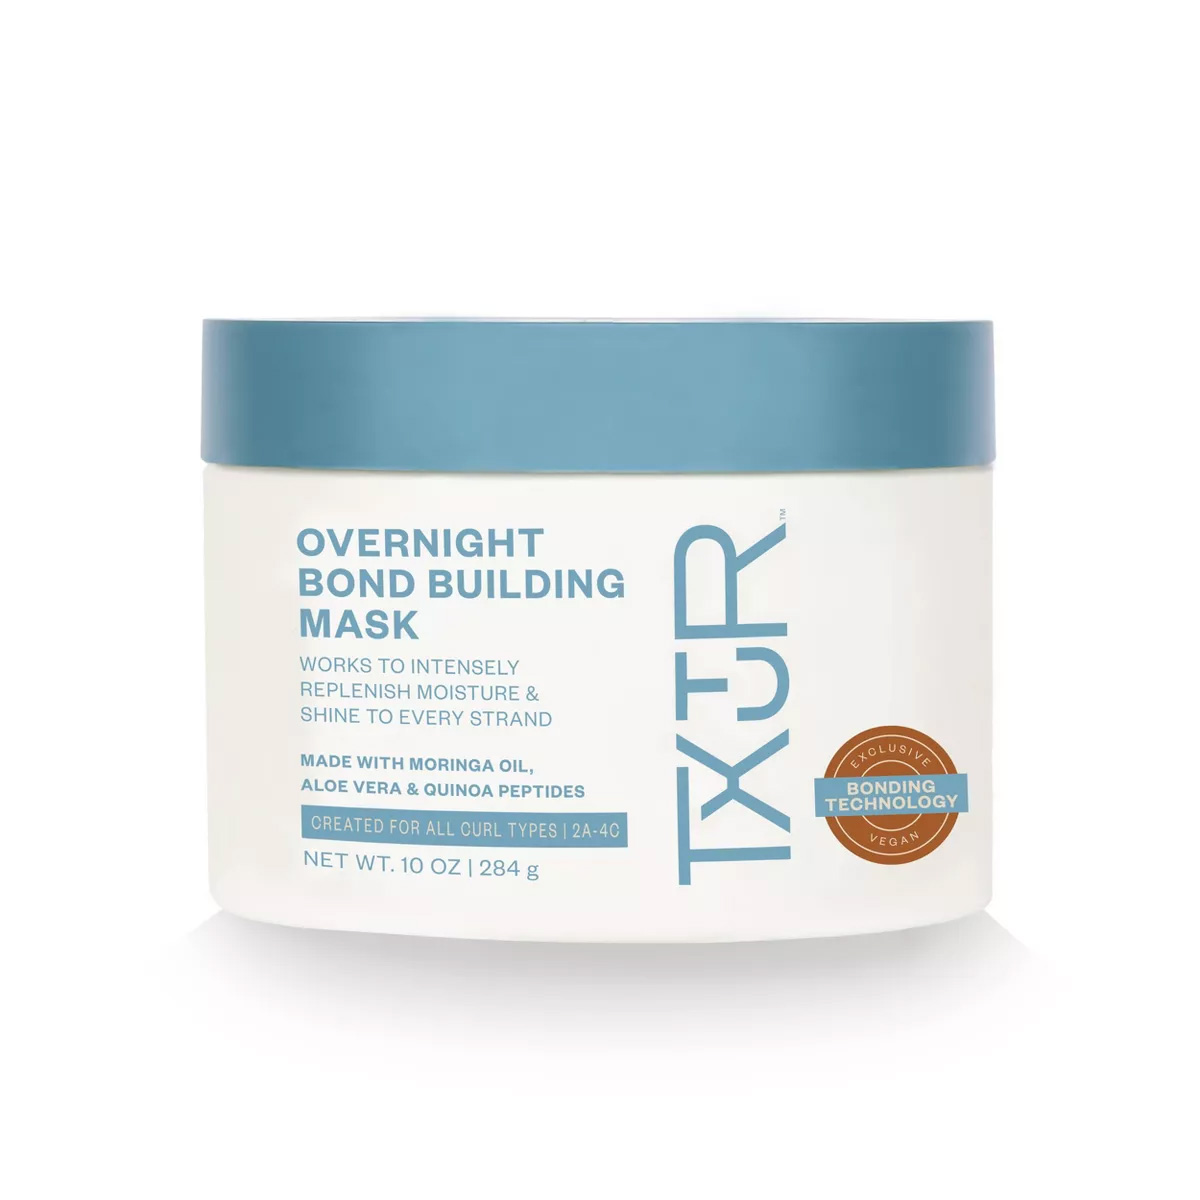 TXTUR Overnight Bond Building Mask in white and blue tub